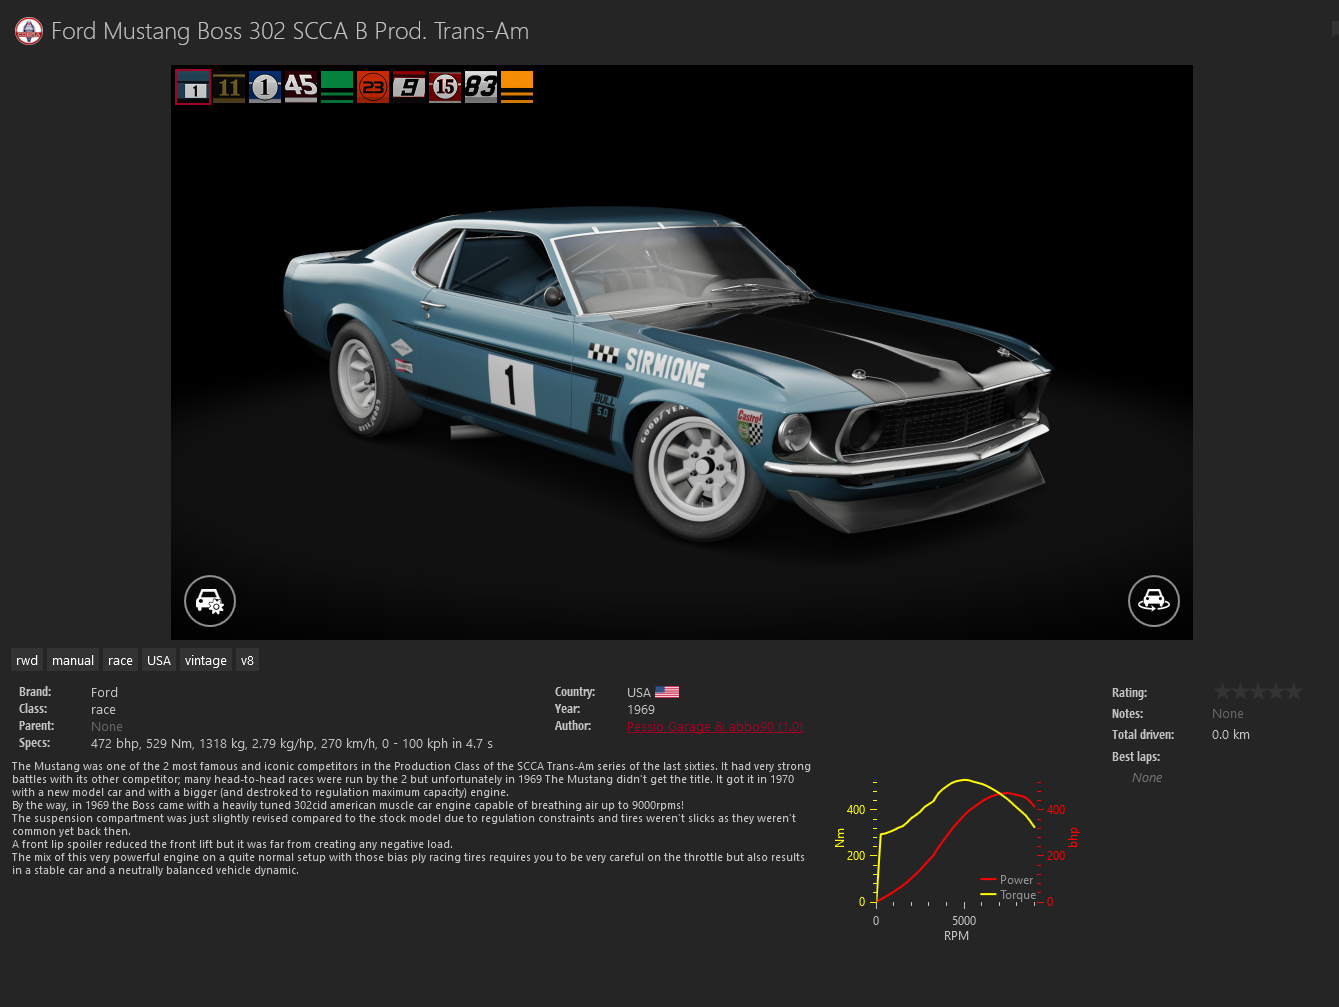 2021-04-06 20_05_18-Ford Mustang Boss 302 SCCA B Prod. Trans-Am.png